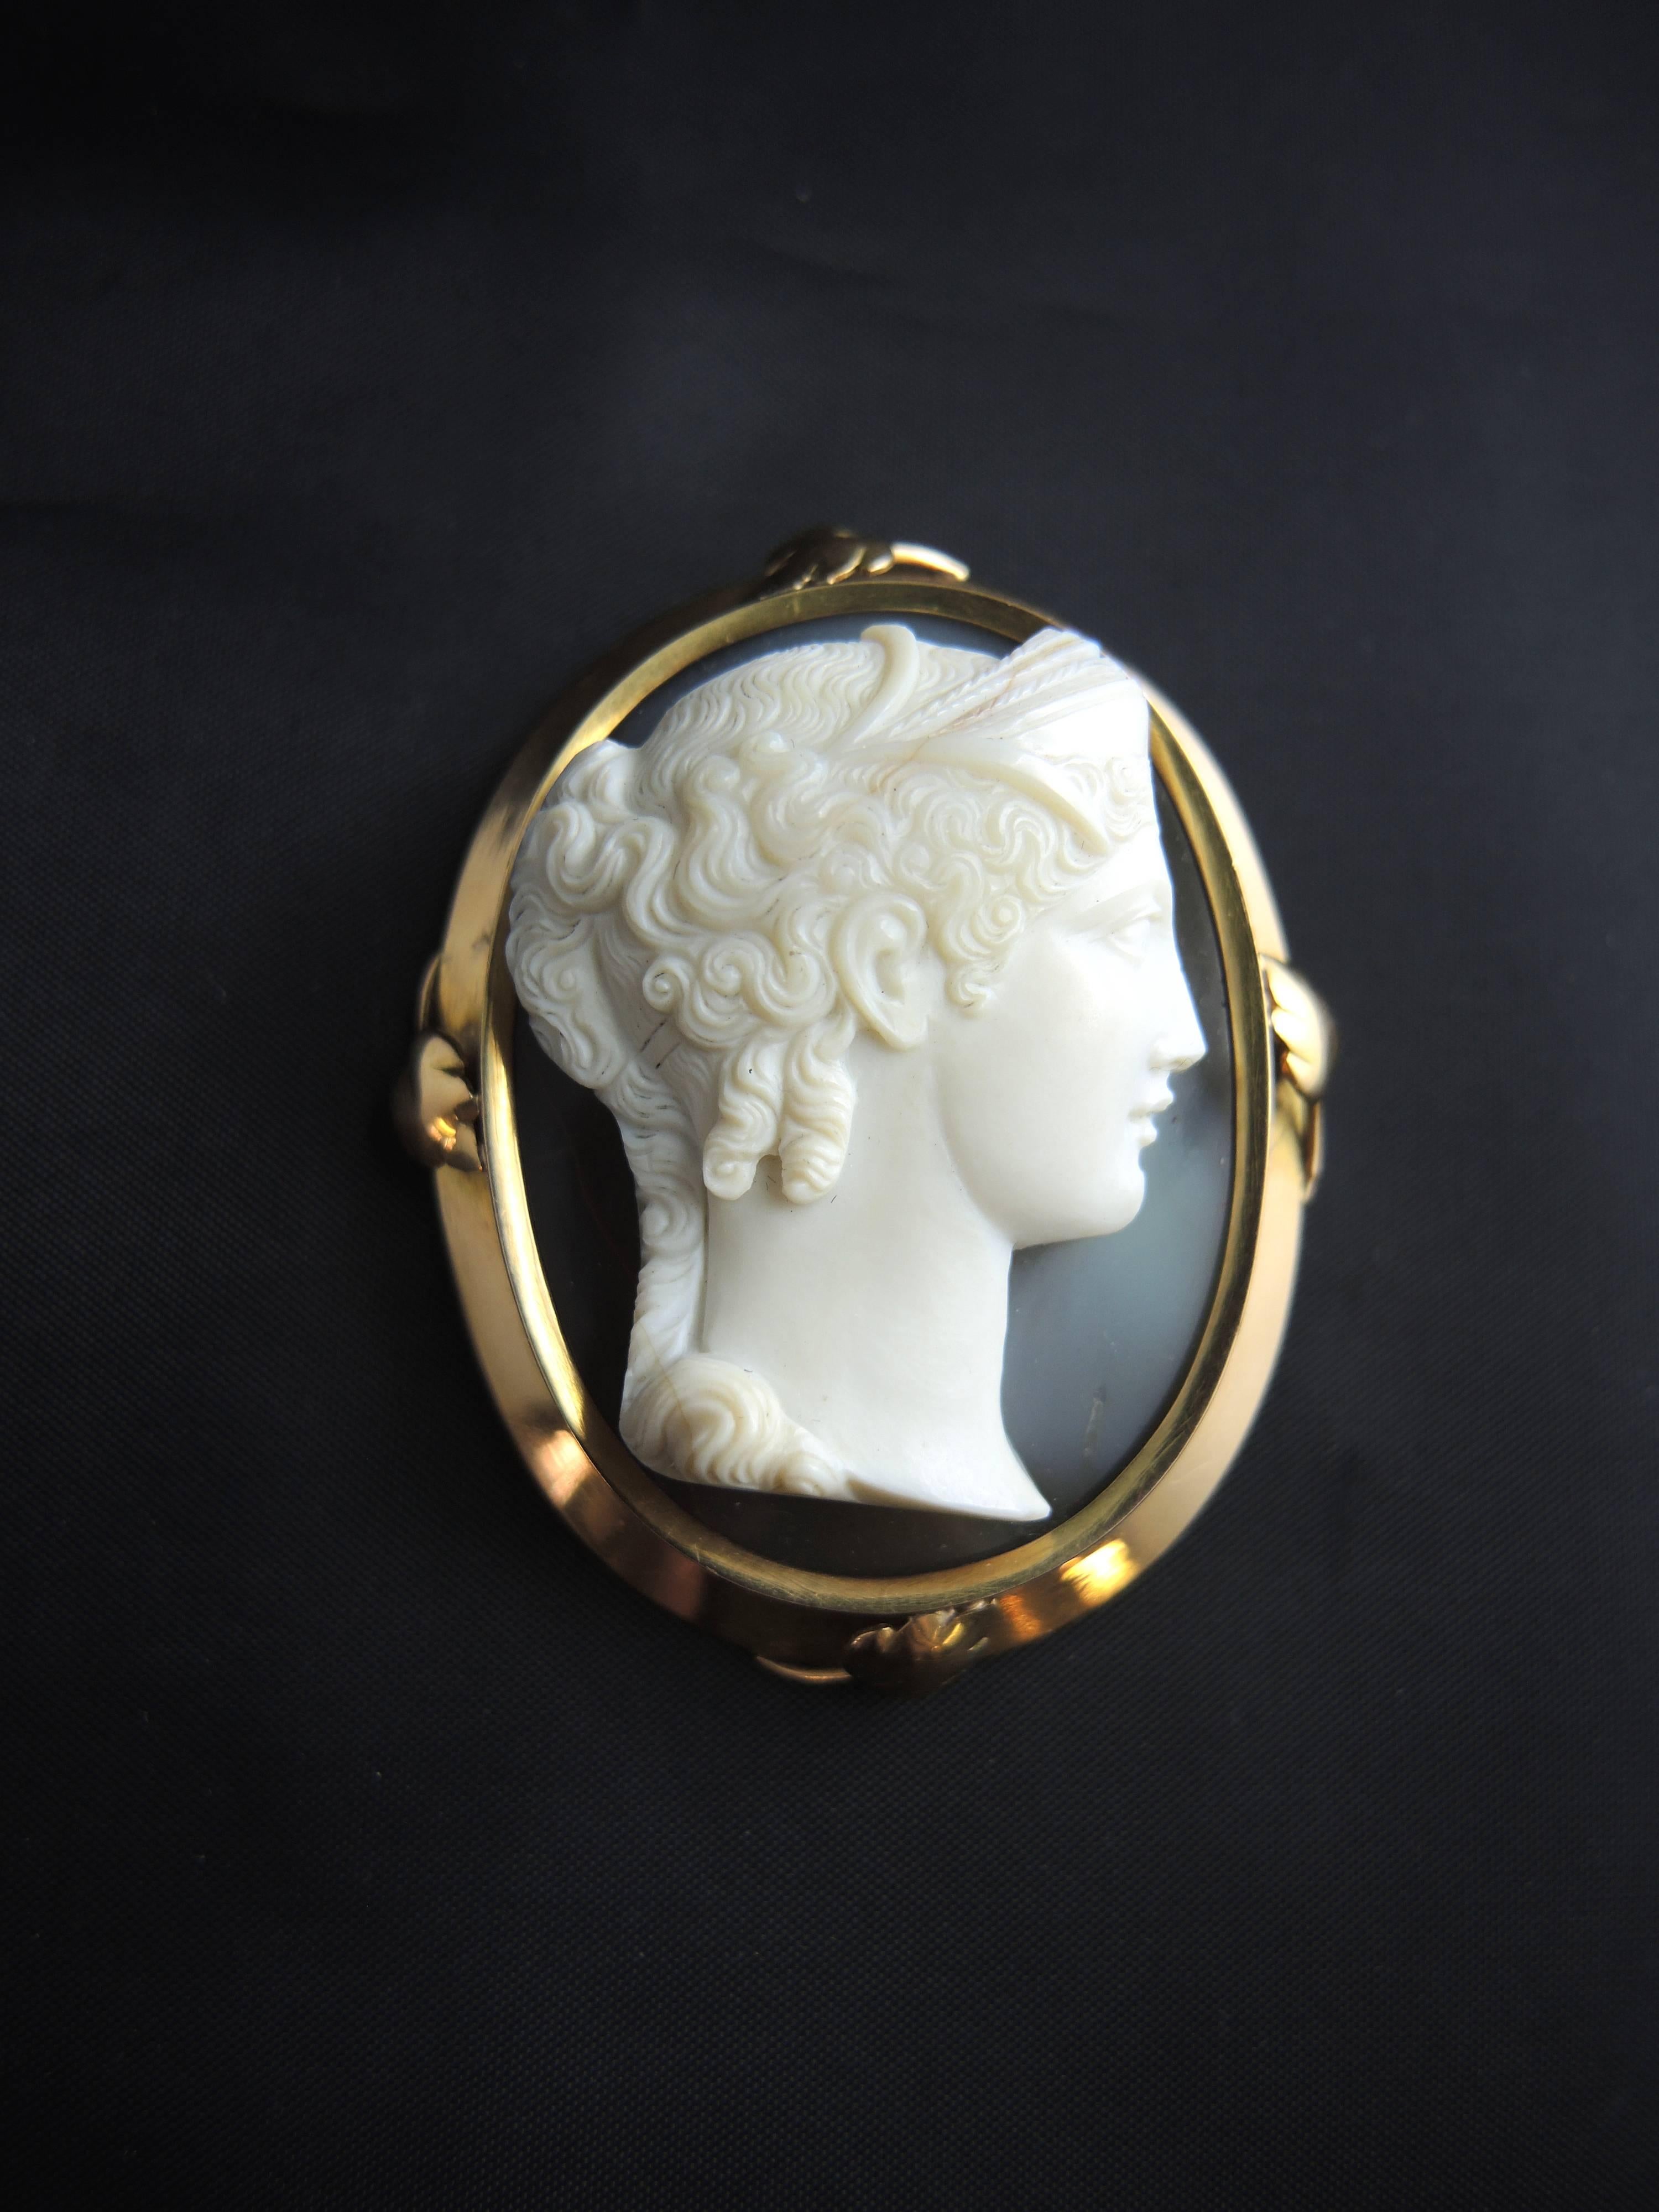 Cameo Brooch and Pendant in 18 carat yellow gold, eagle head hallmark. 

This cameo displays the right profile of a woman with her hair up, engraved into a single piece of agate. The surround is decorated with gold leaves.

It can be worn as a